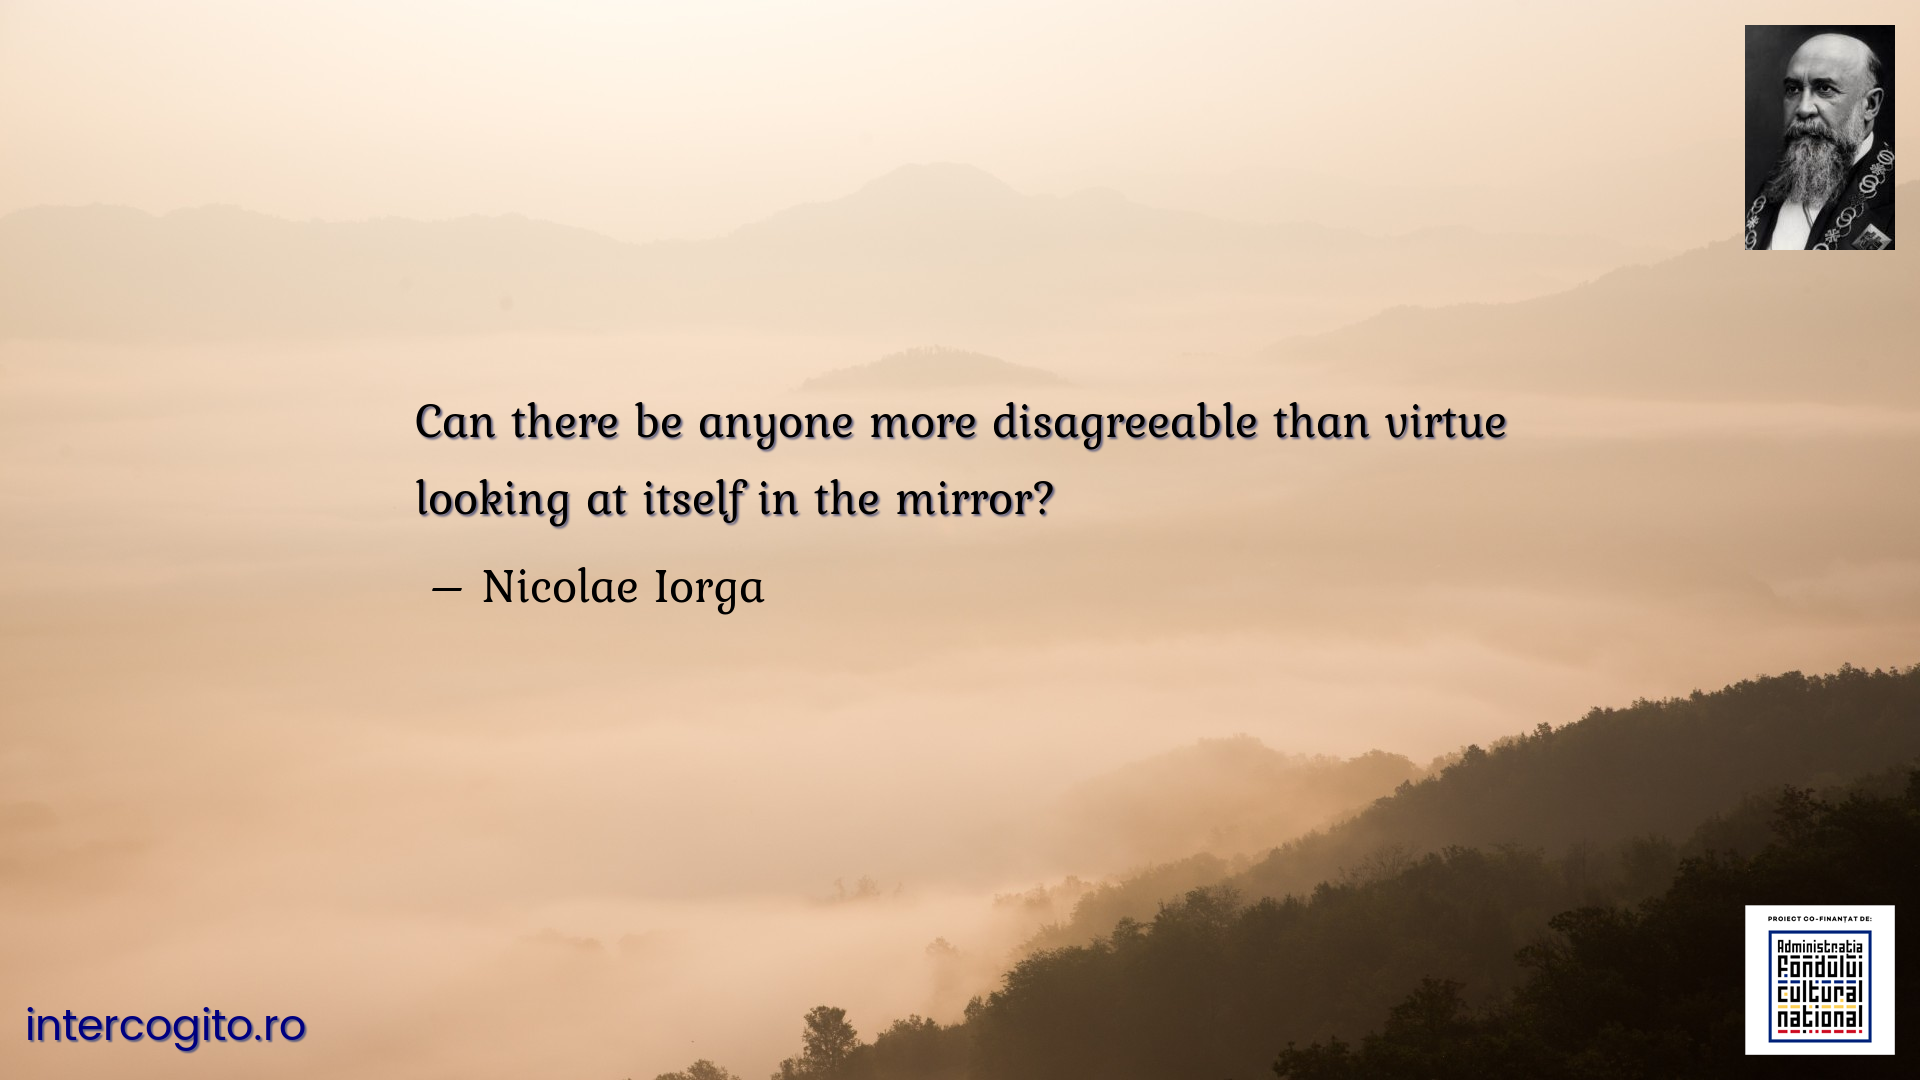 Can there be anyone more disagreeable than virtue looking at itself in the mirror?